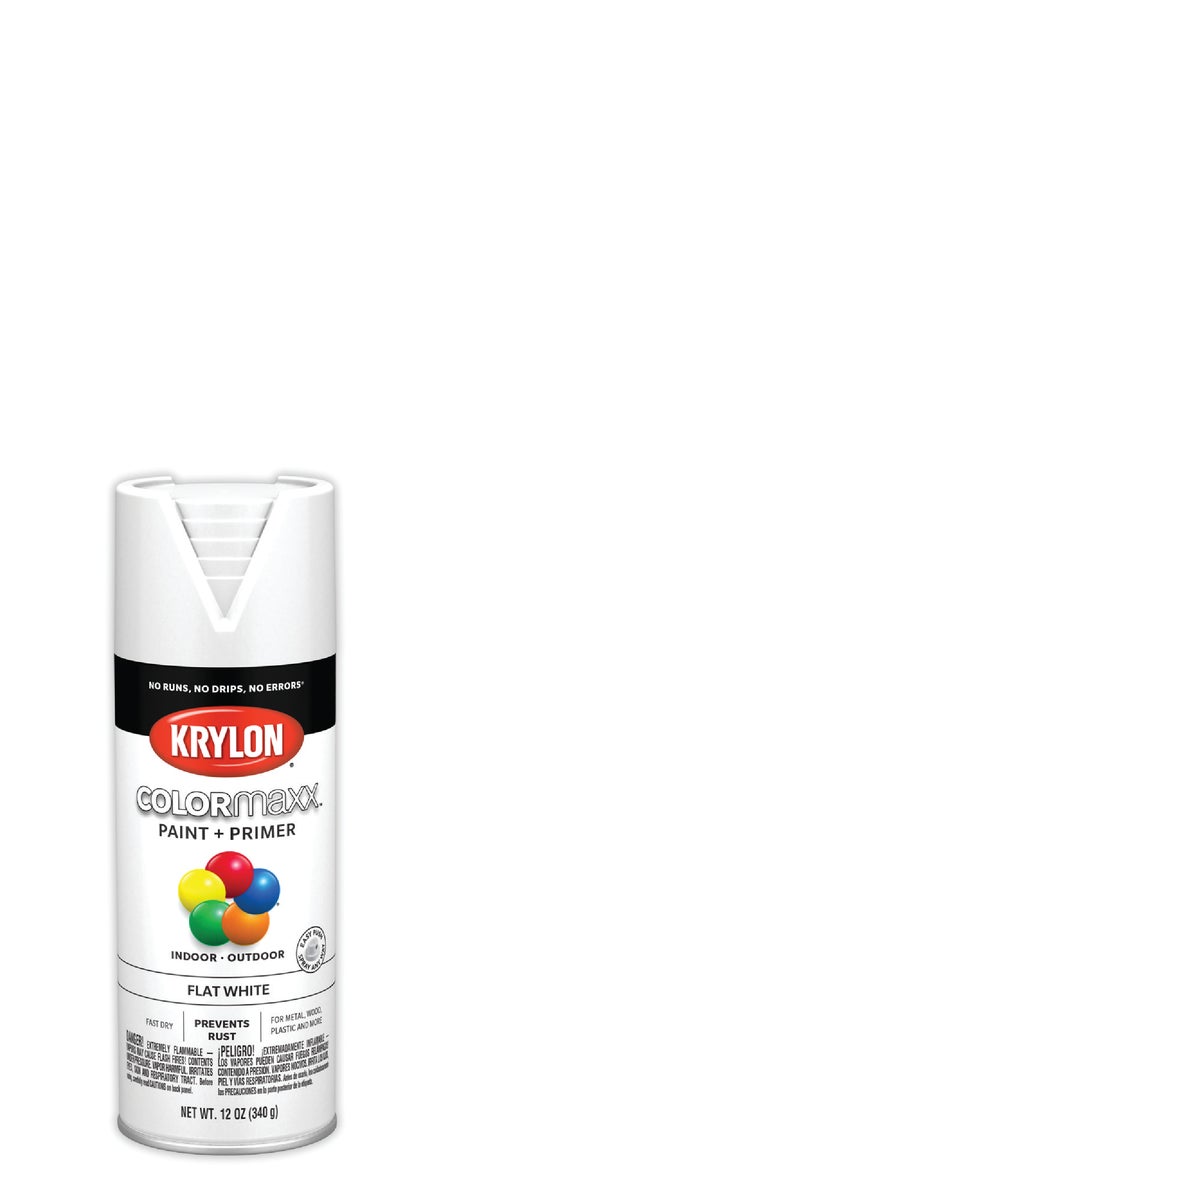 Item 773972, Krylon ColorMaxx spray paint provides brilliant, on-trend colors in a 